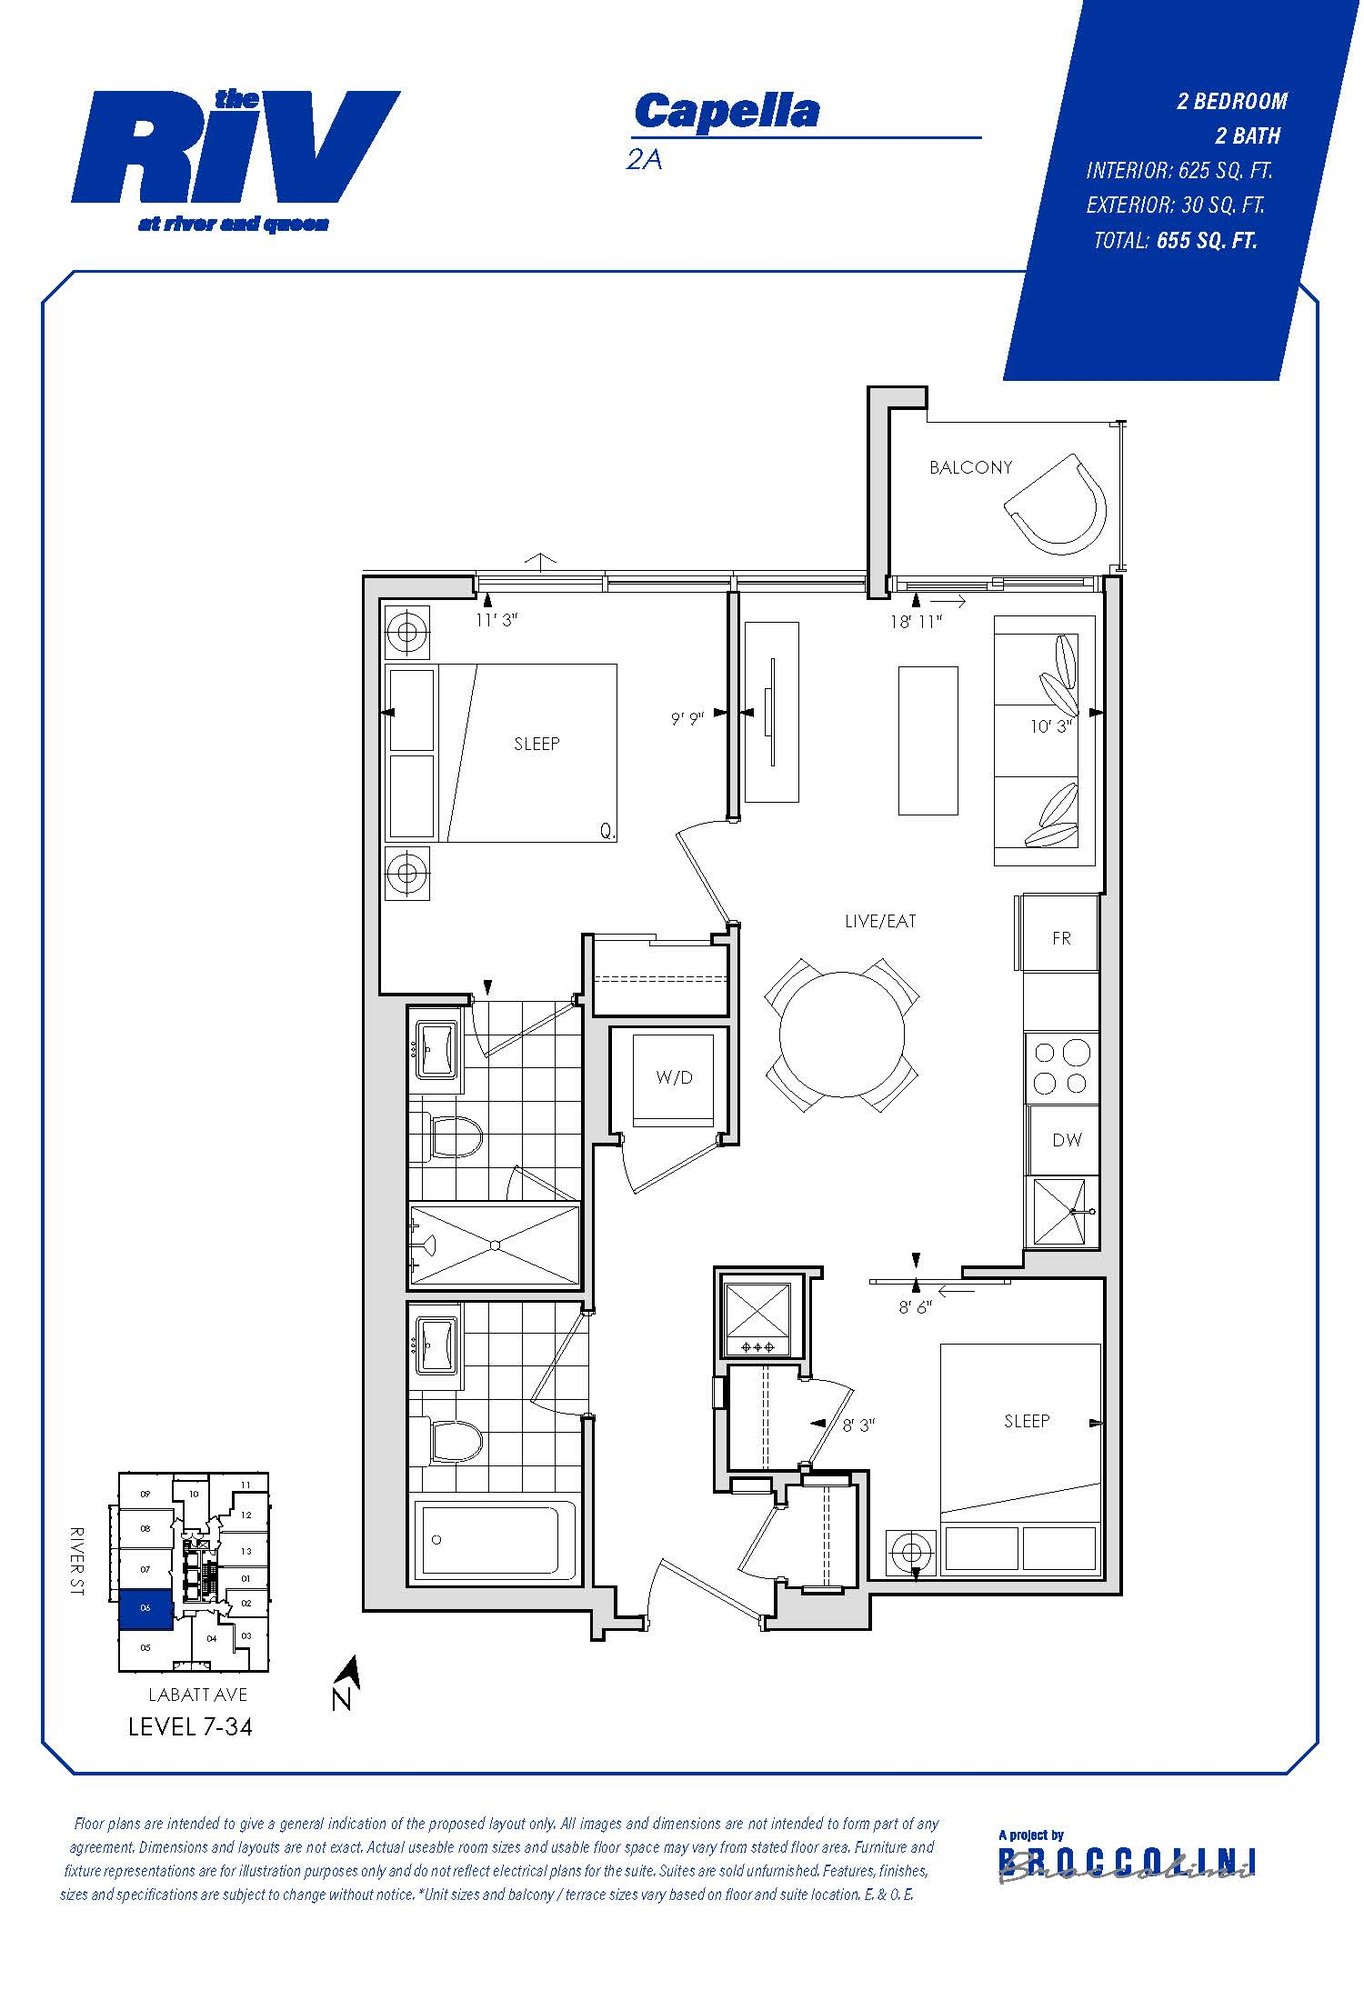 Floor plan for Capella two bedroom unit in The Riv